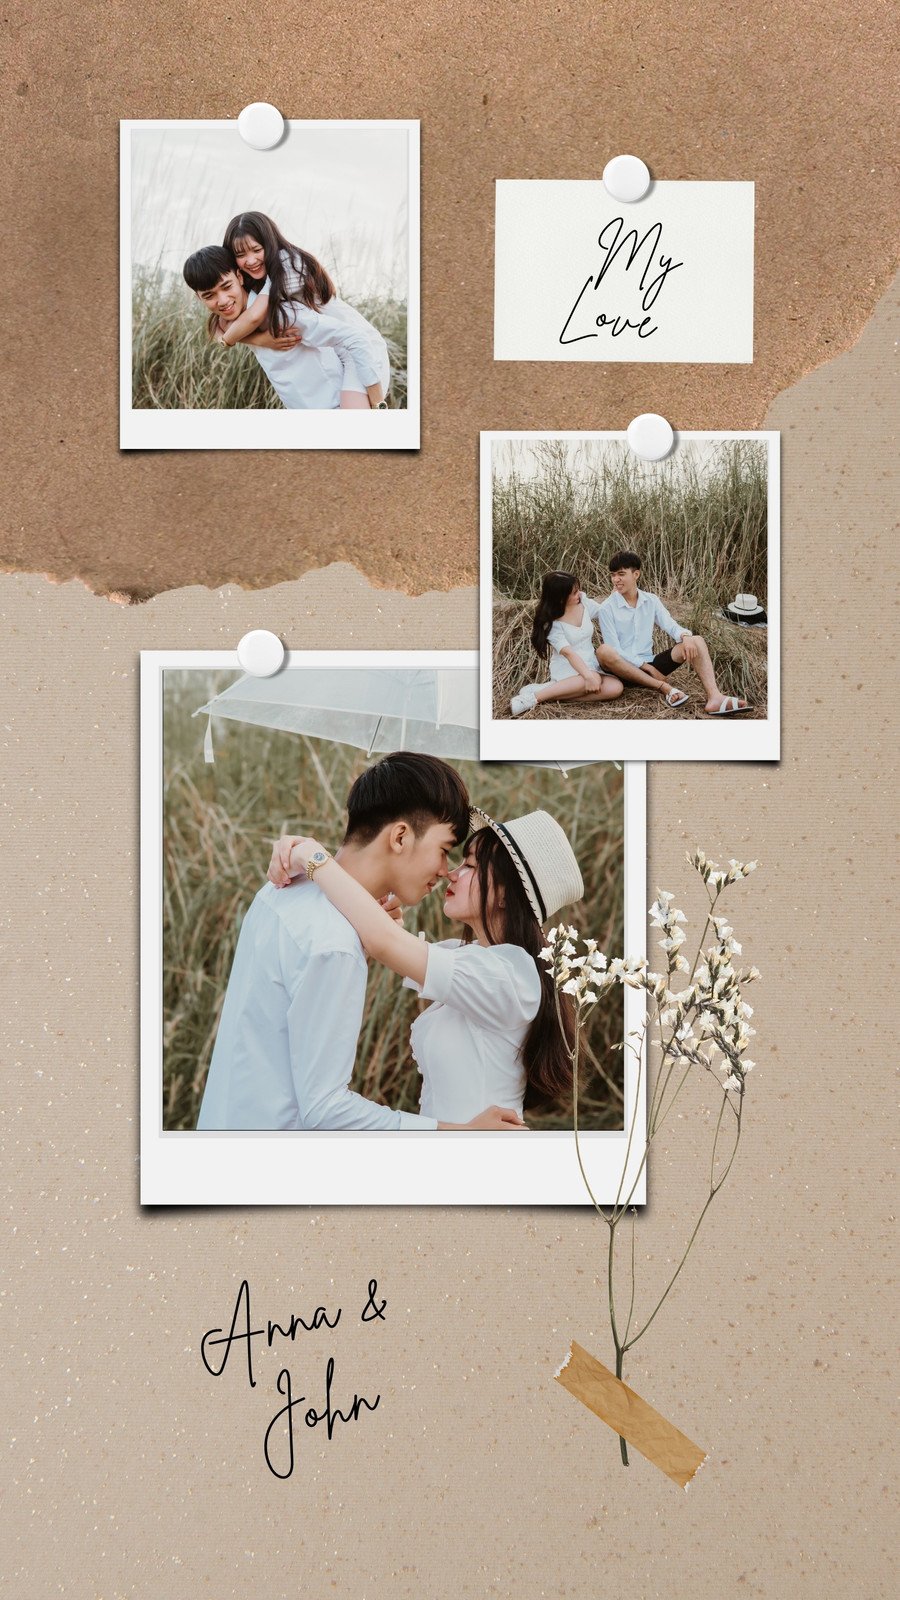 cute love collage backgrounds